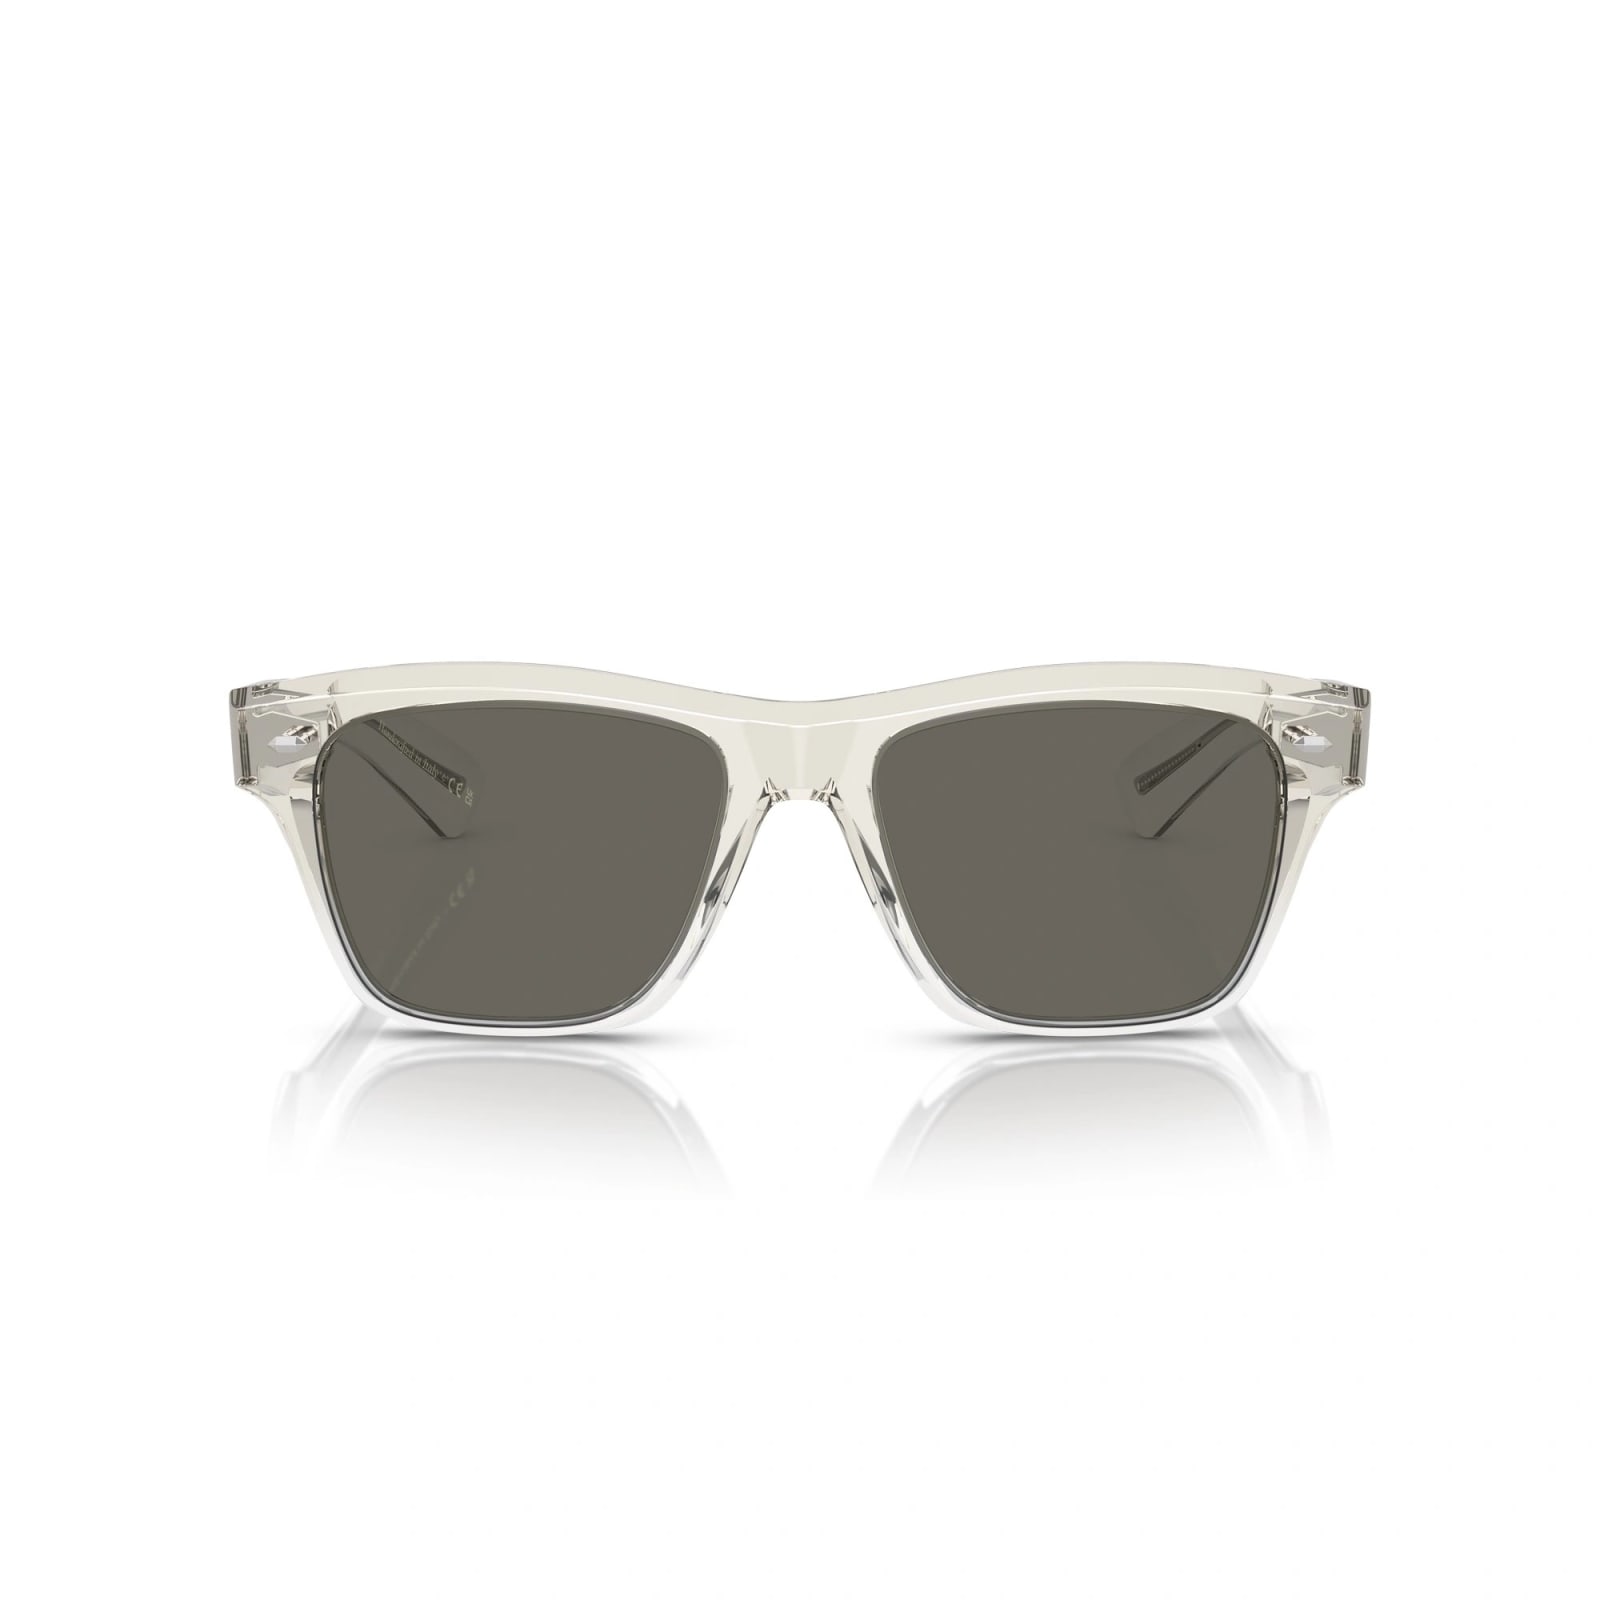 Oliver Peoples Ov5522s 1752r5 Sunglasses In Grey